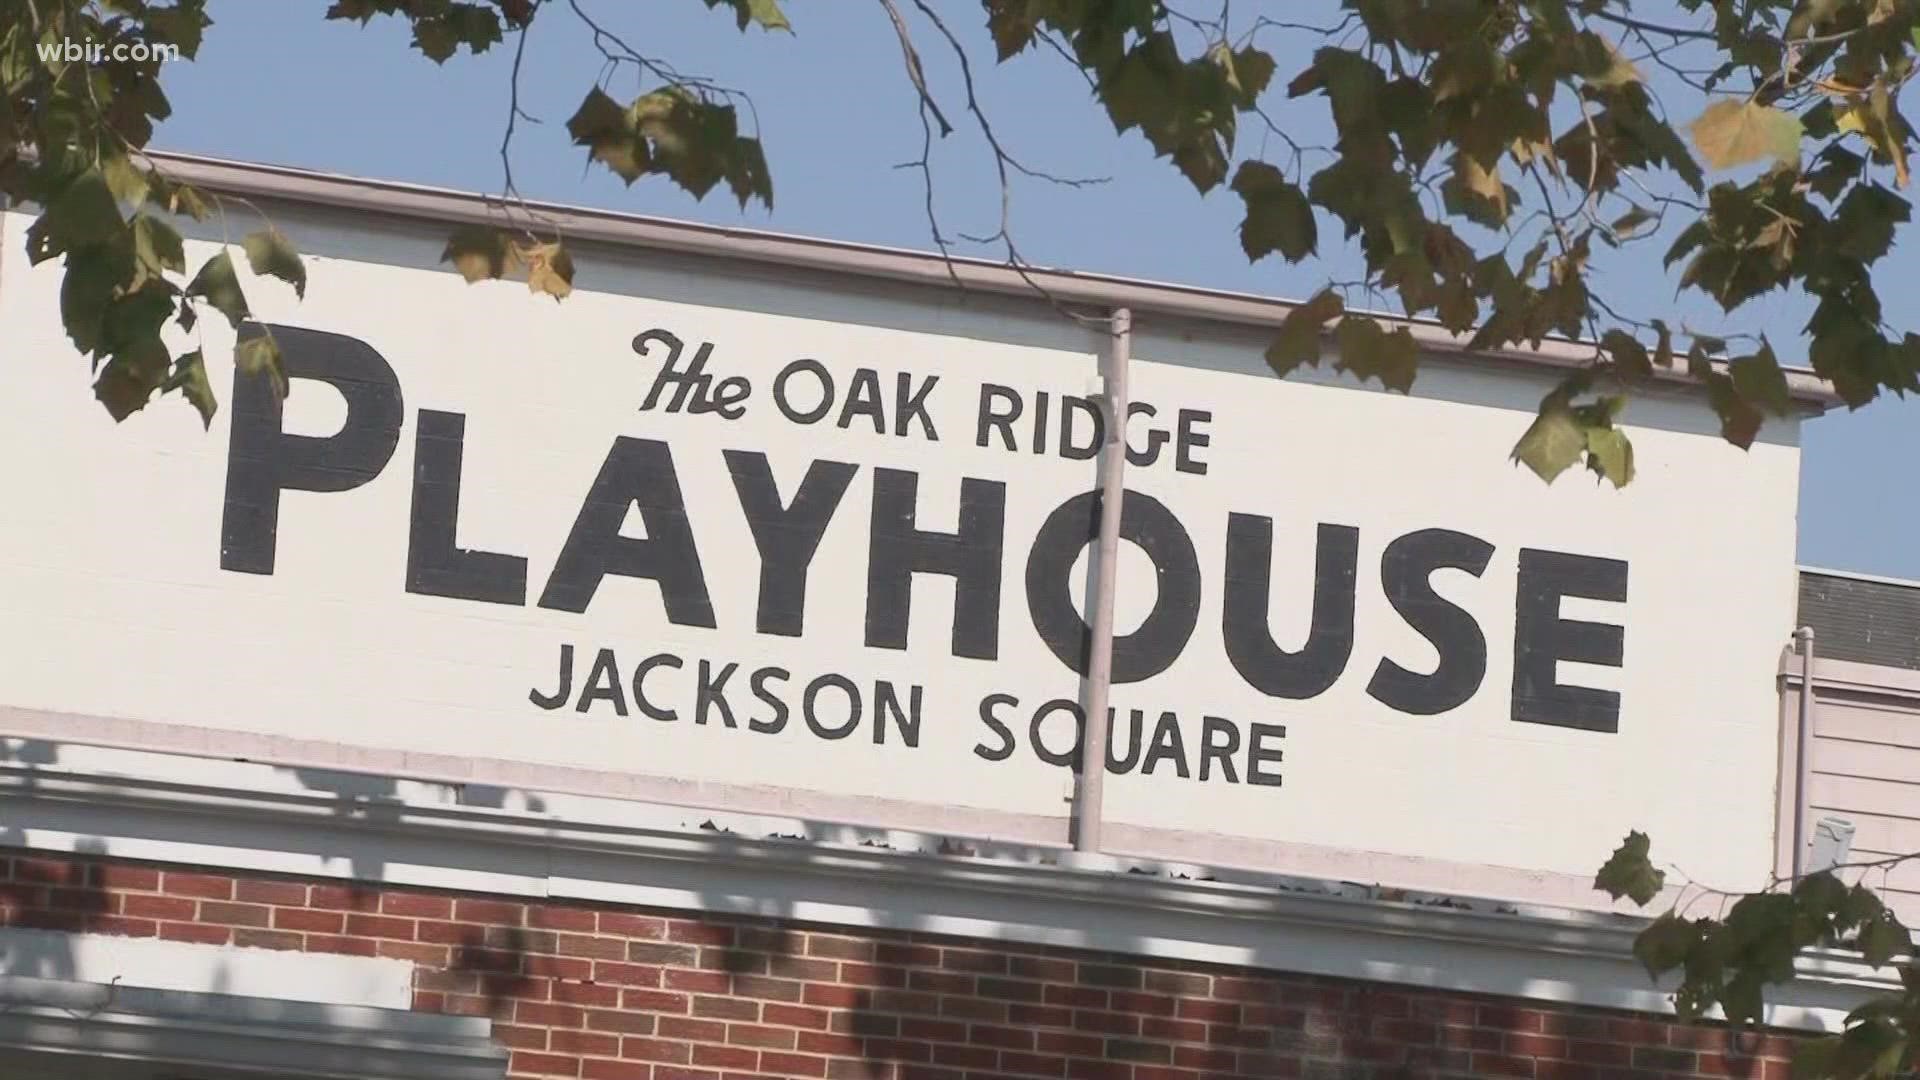 For nearly six decades, the Oak Ridge Playhouse  has called Jackson Square home. It began as the Little Theater of Oak Ridge.